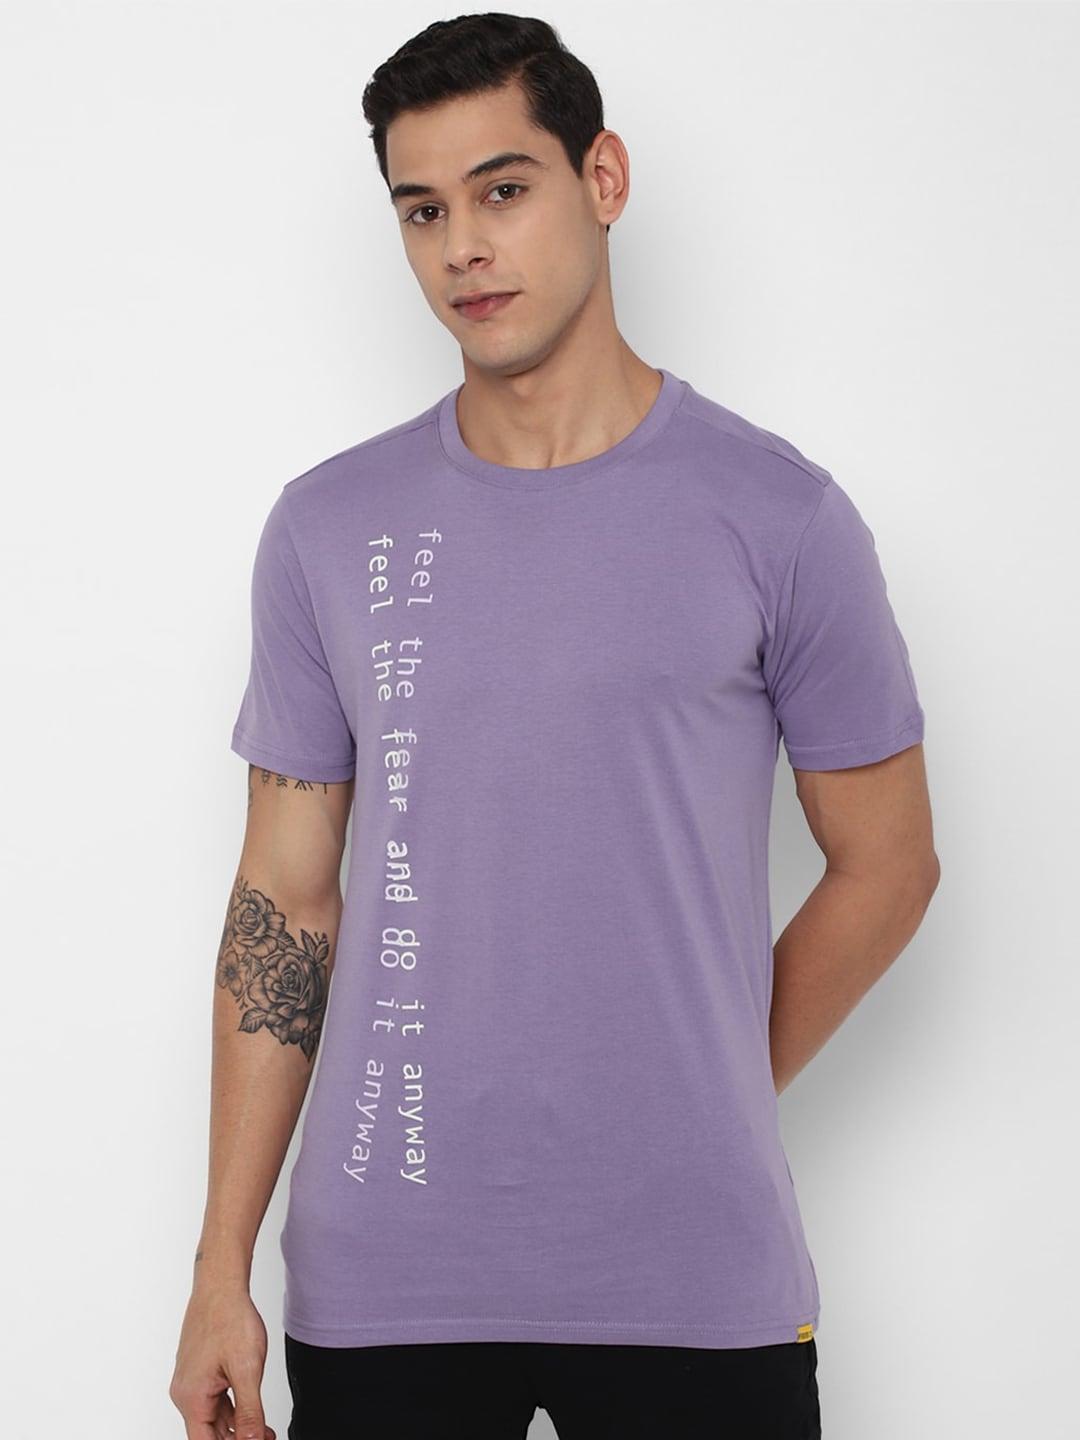 forever-21-men-purple-&-white-typography-printed-pure-cotton-t-shirt